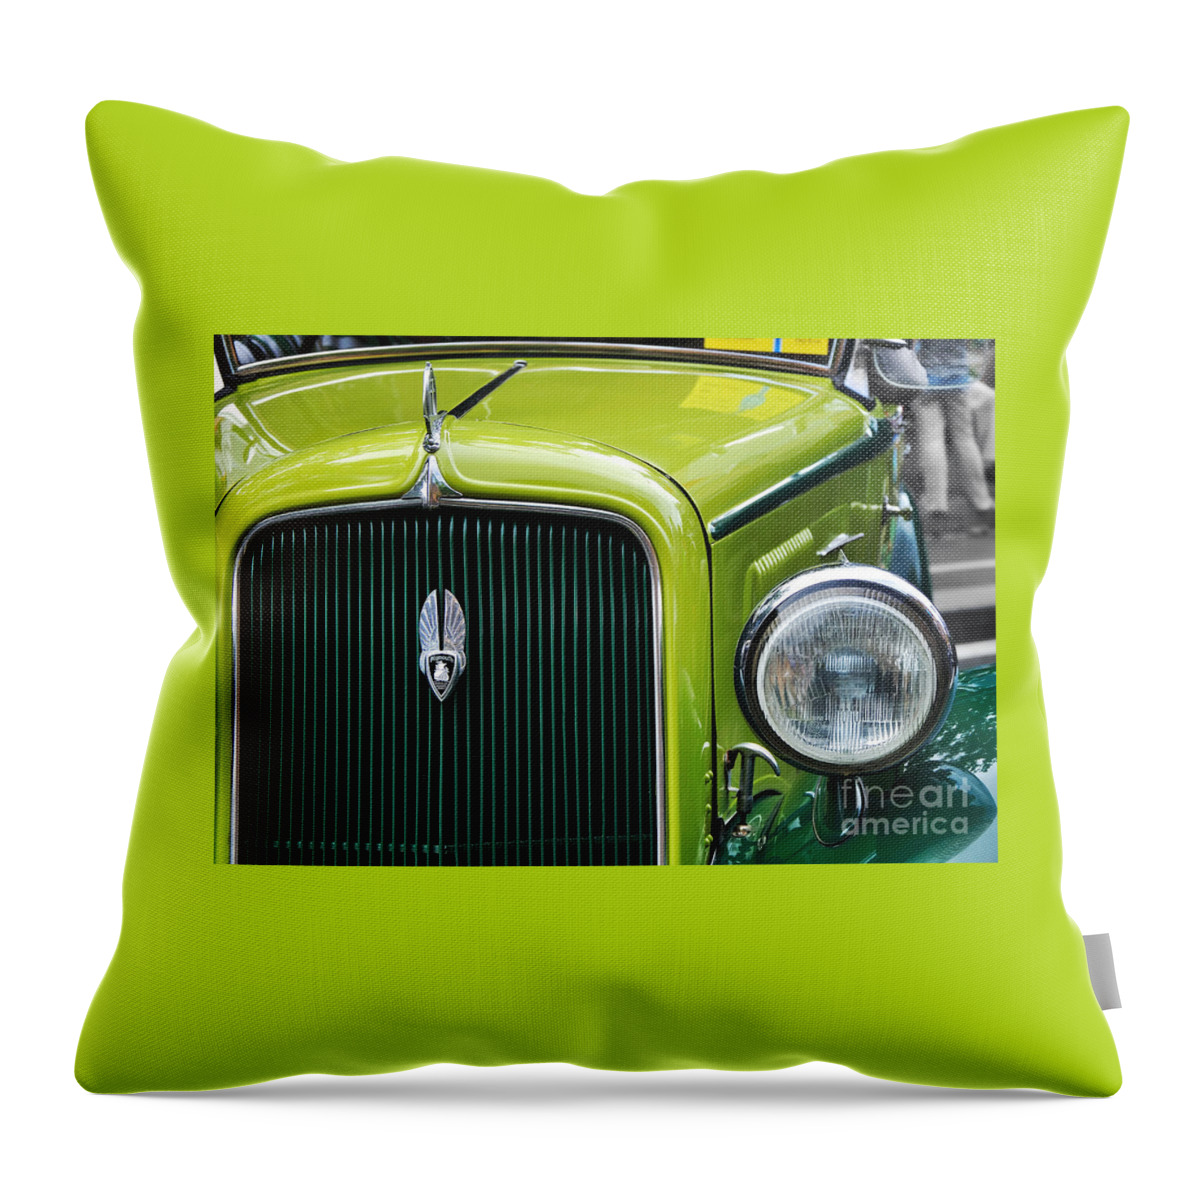 Photography Throw Pillow featuring the photograph 1934 Plymouth - Badge Grill Hood Ornament by Kaye Menner